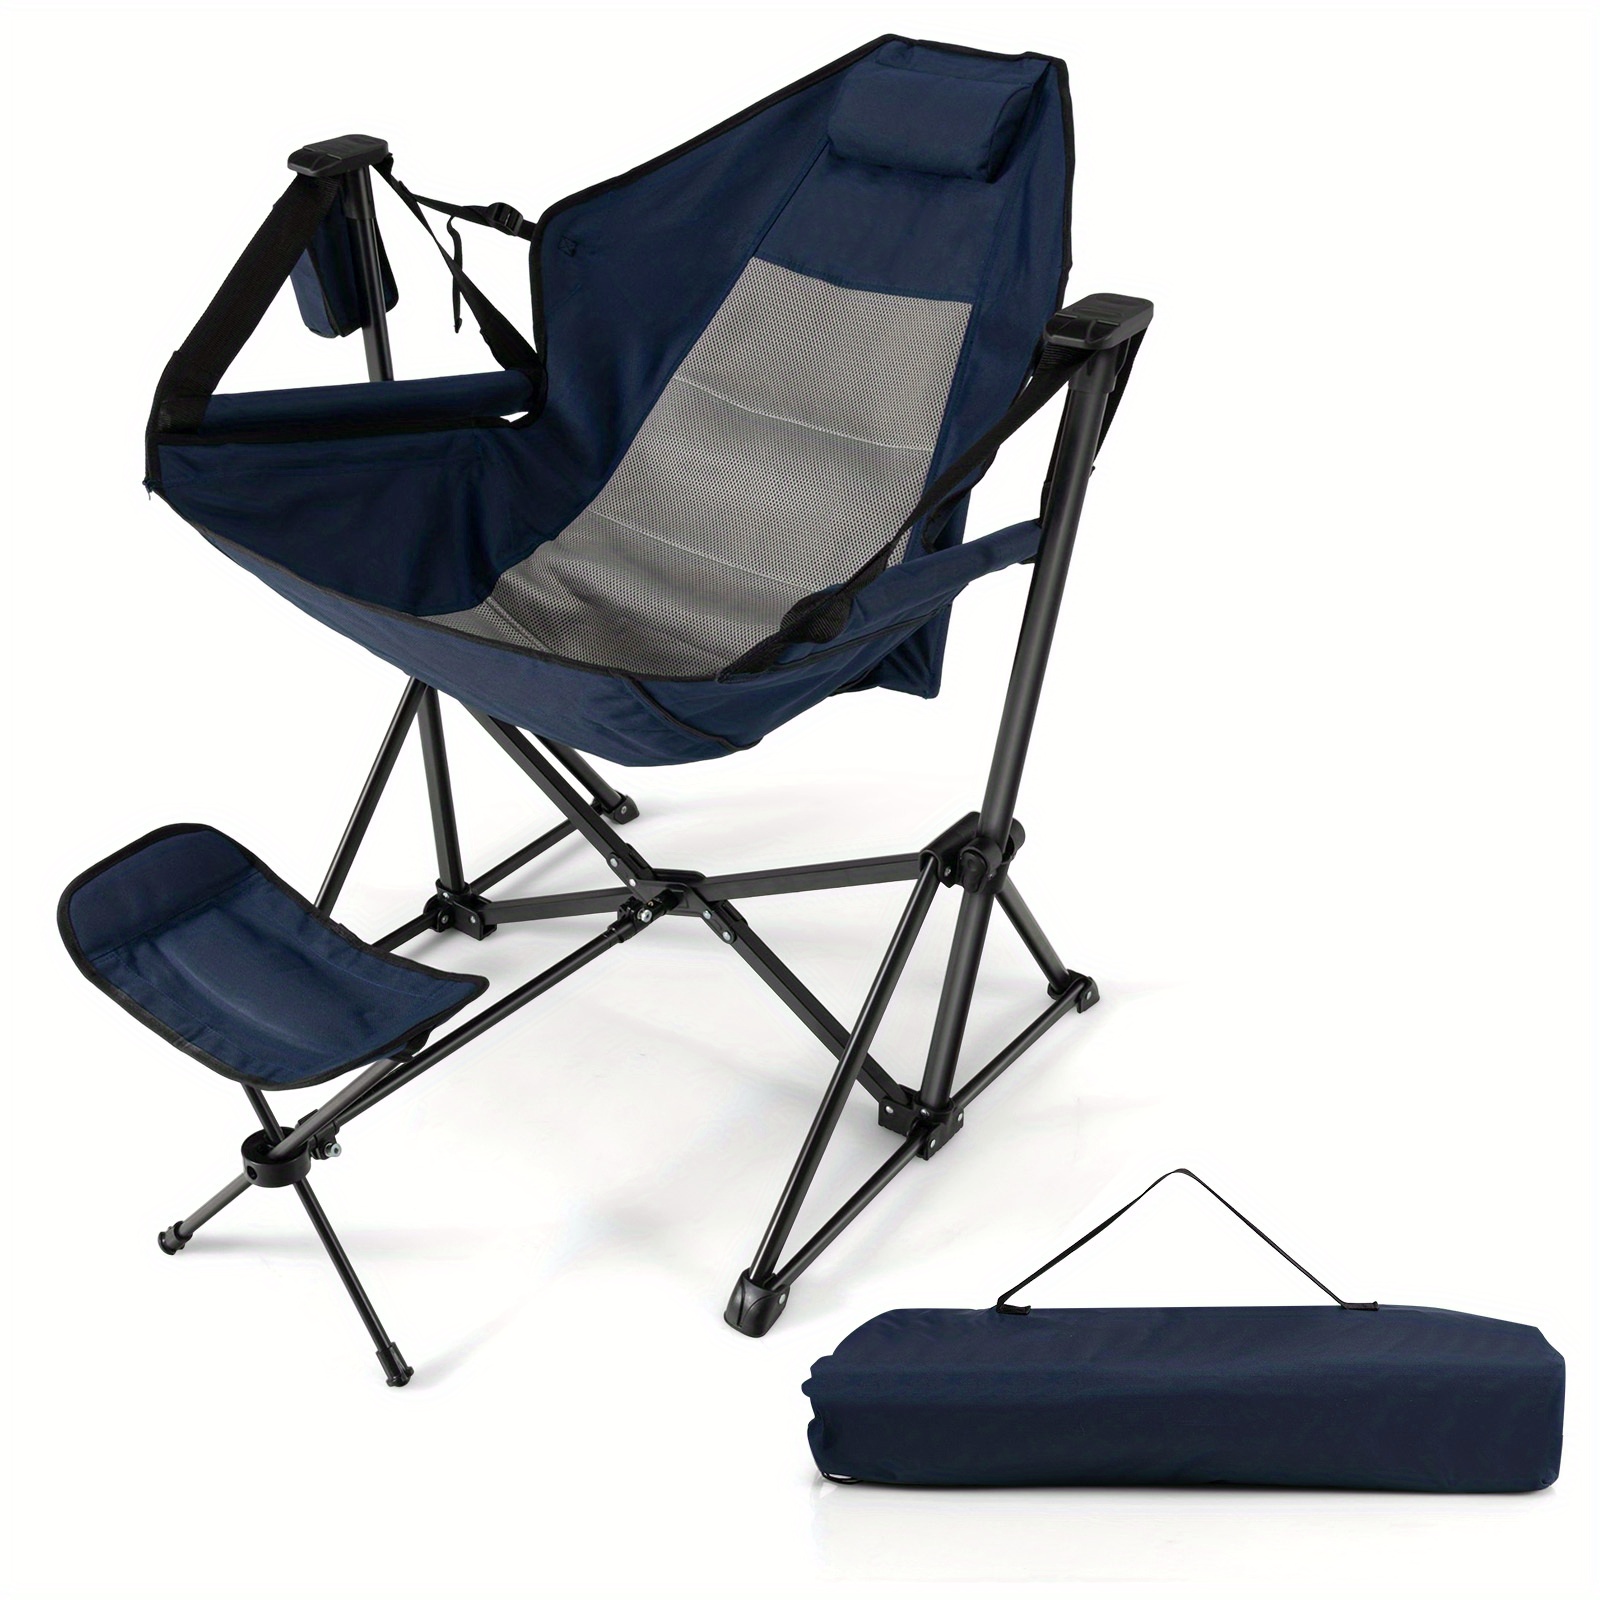 

Maxmass Hammock Camping Chair W/ Retractable Footrest & Carrying Bag For Camping Picnic